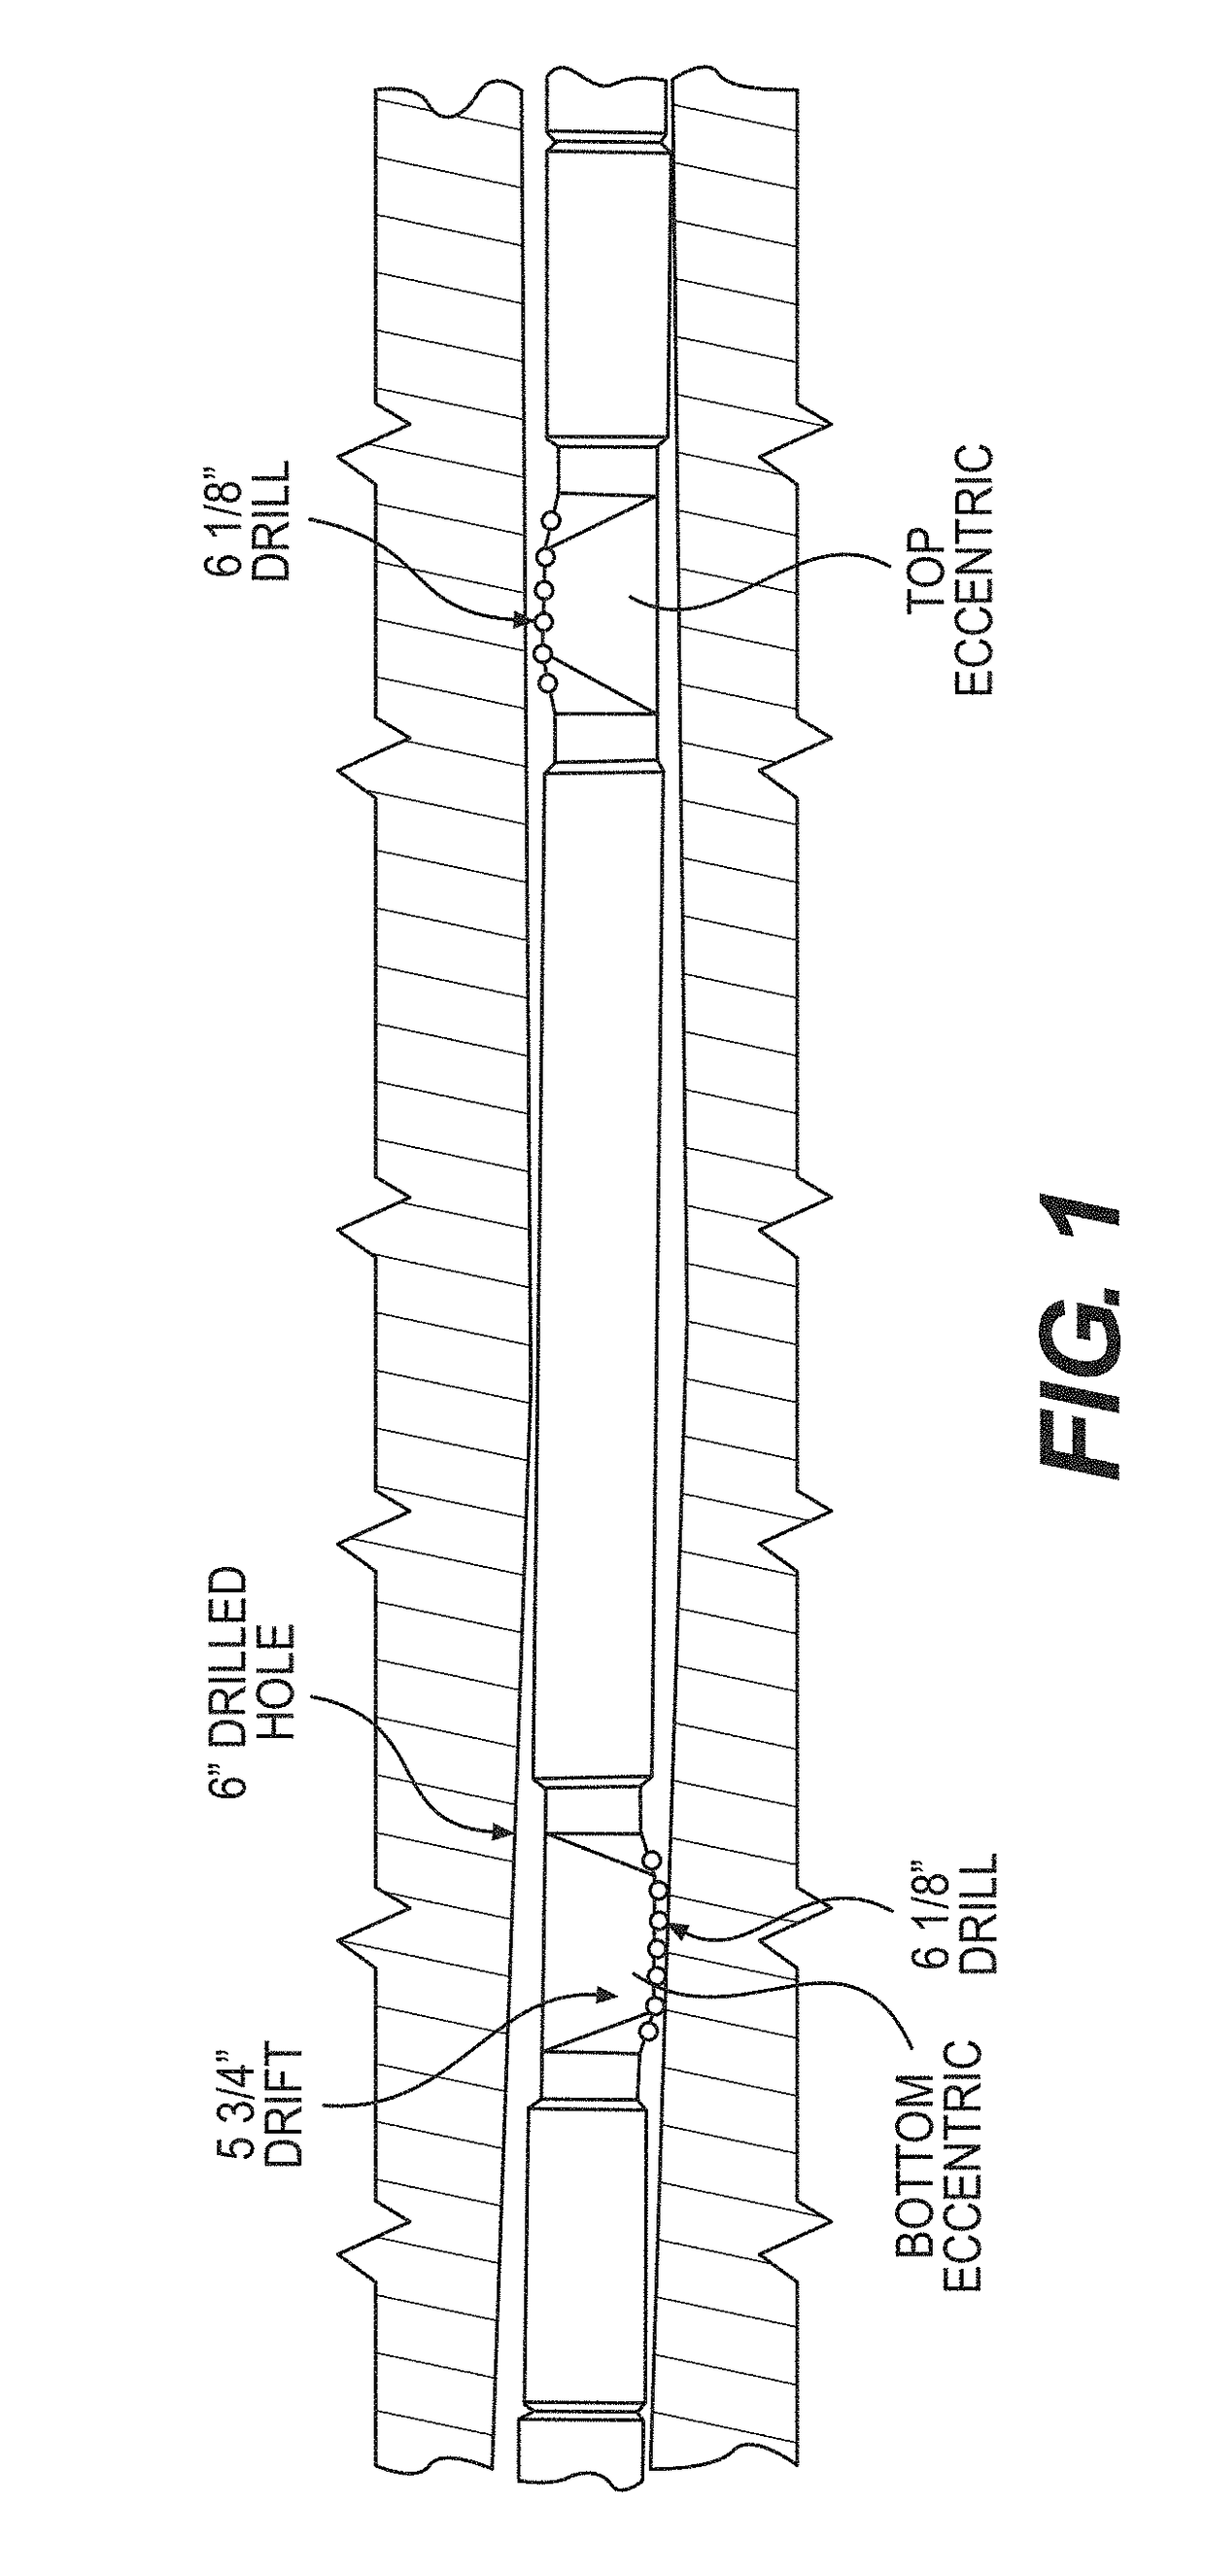 Method and apparatus for steering a drill string and reaming well bore surfaces nearer the center of drift